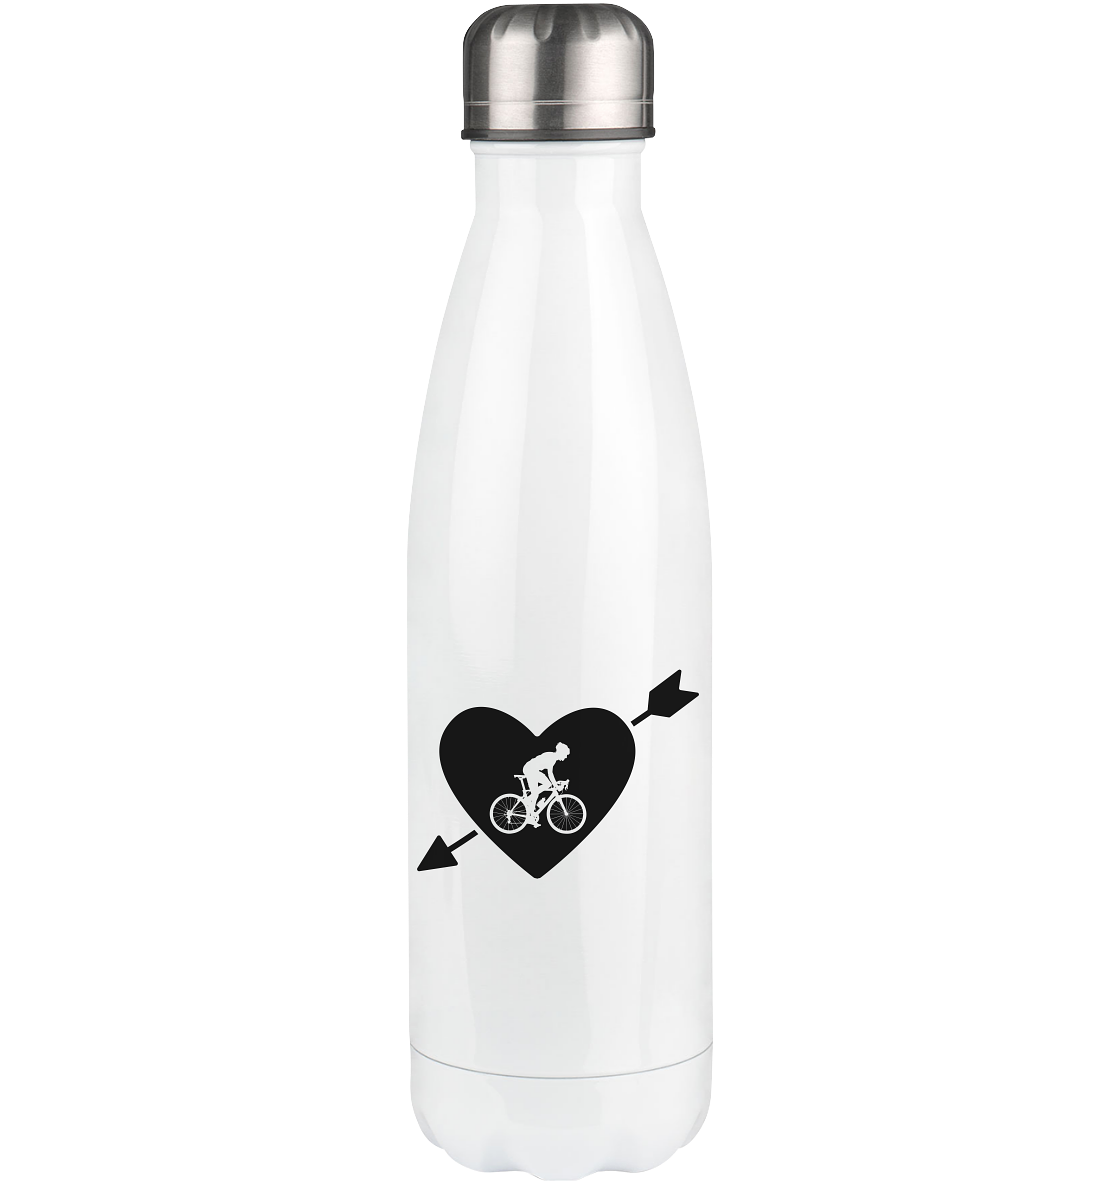 Arrow Heart and Cycling 1 - Edelstahl Thermosflasche fahrrad 500ml